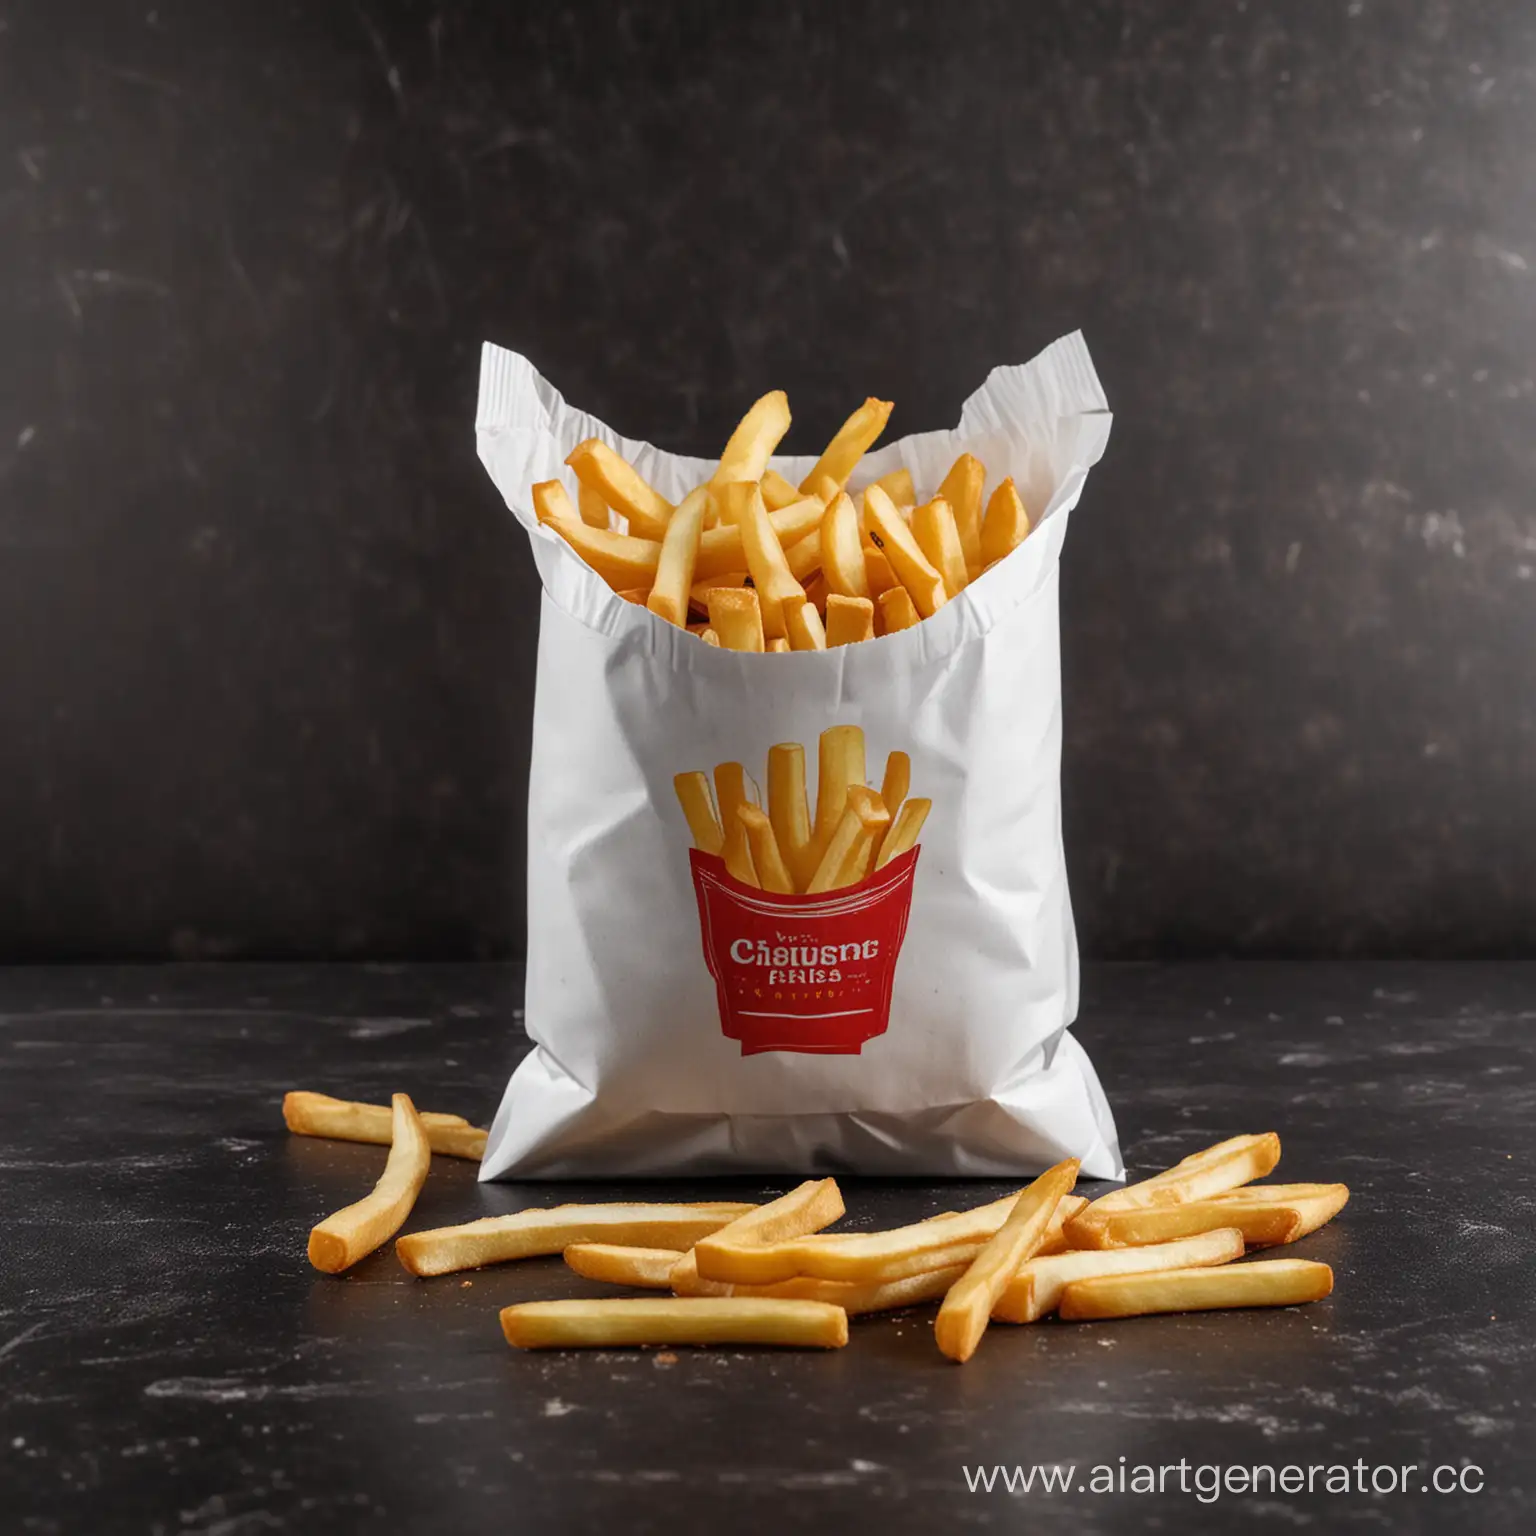 Delicious-French-Fries-in-Stylish-White-Packaging-on-Dark-Background